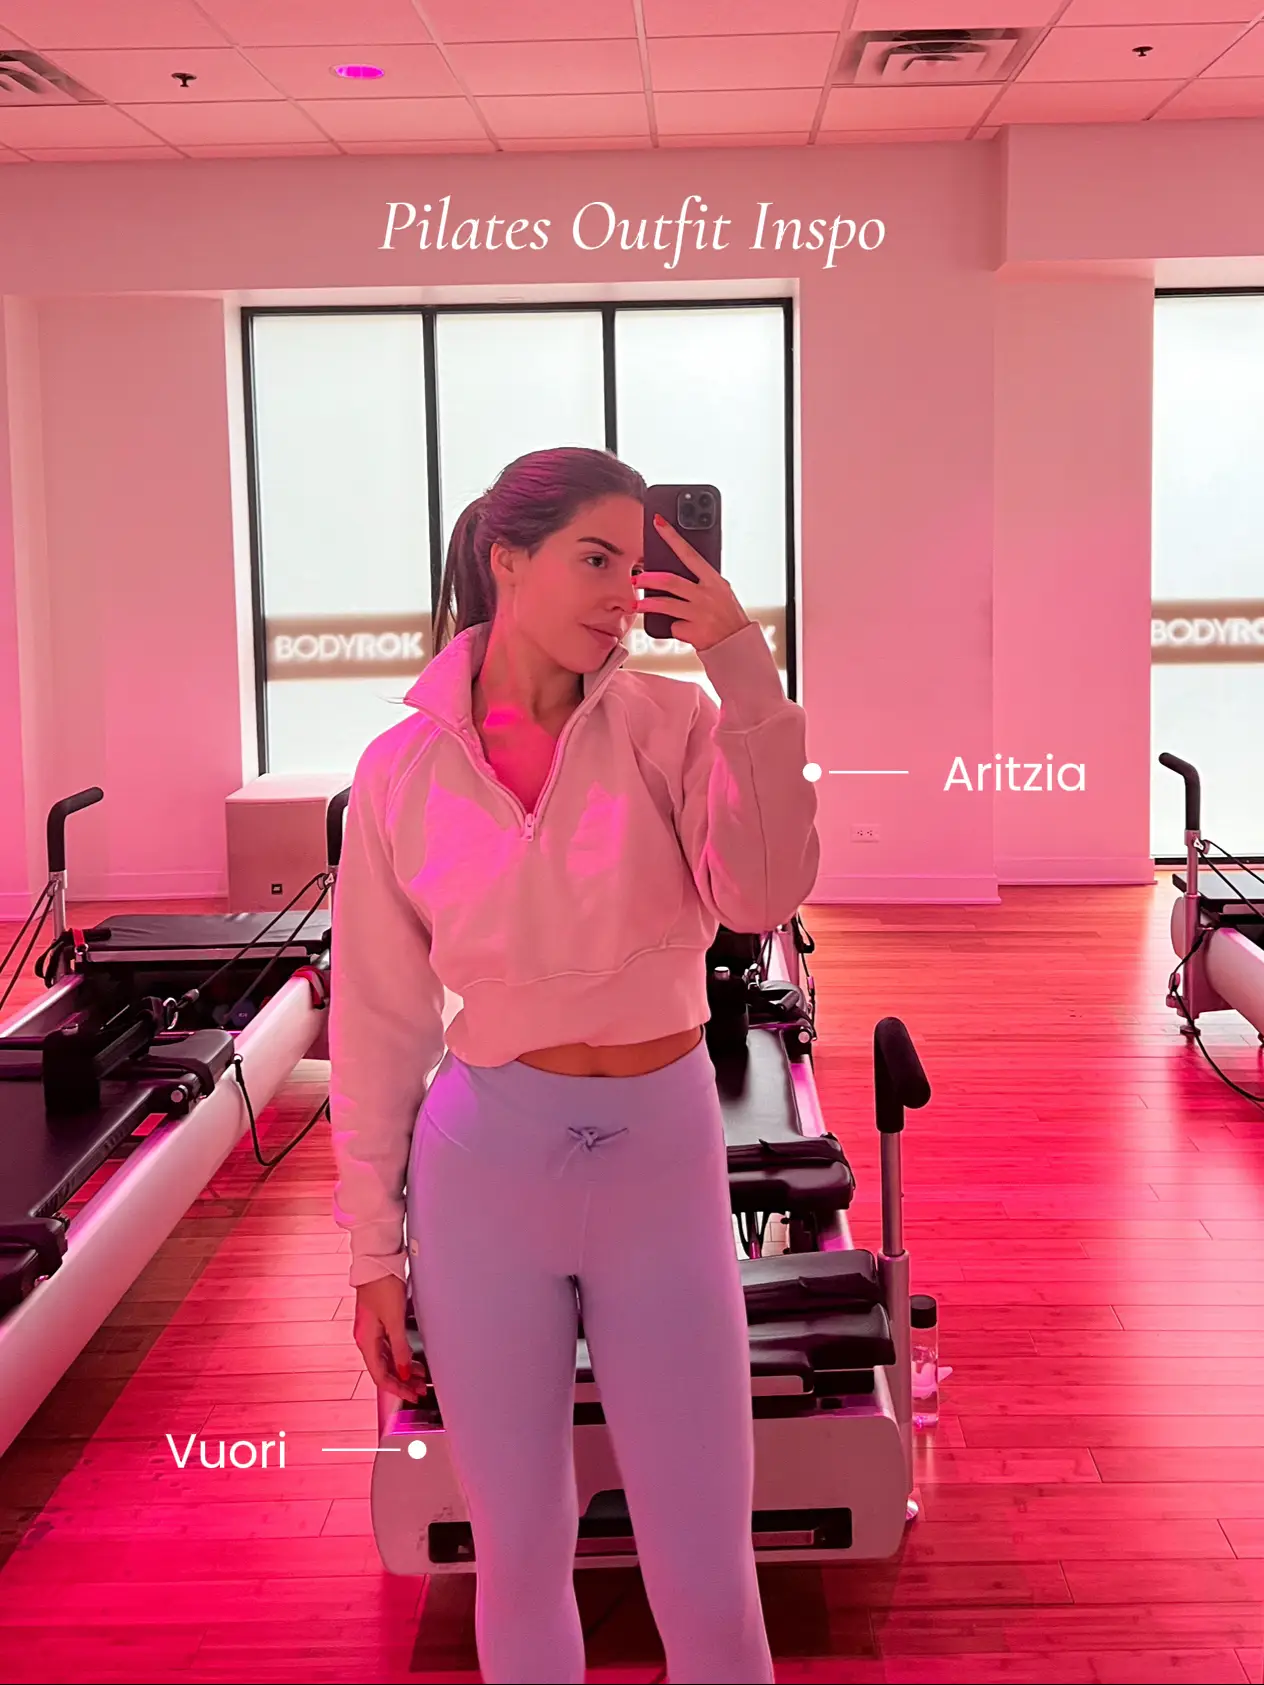 Pilates Outfit Inspo🩰, Gallery posted by Izabel